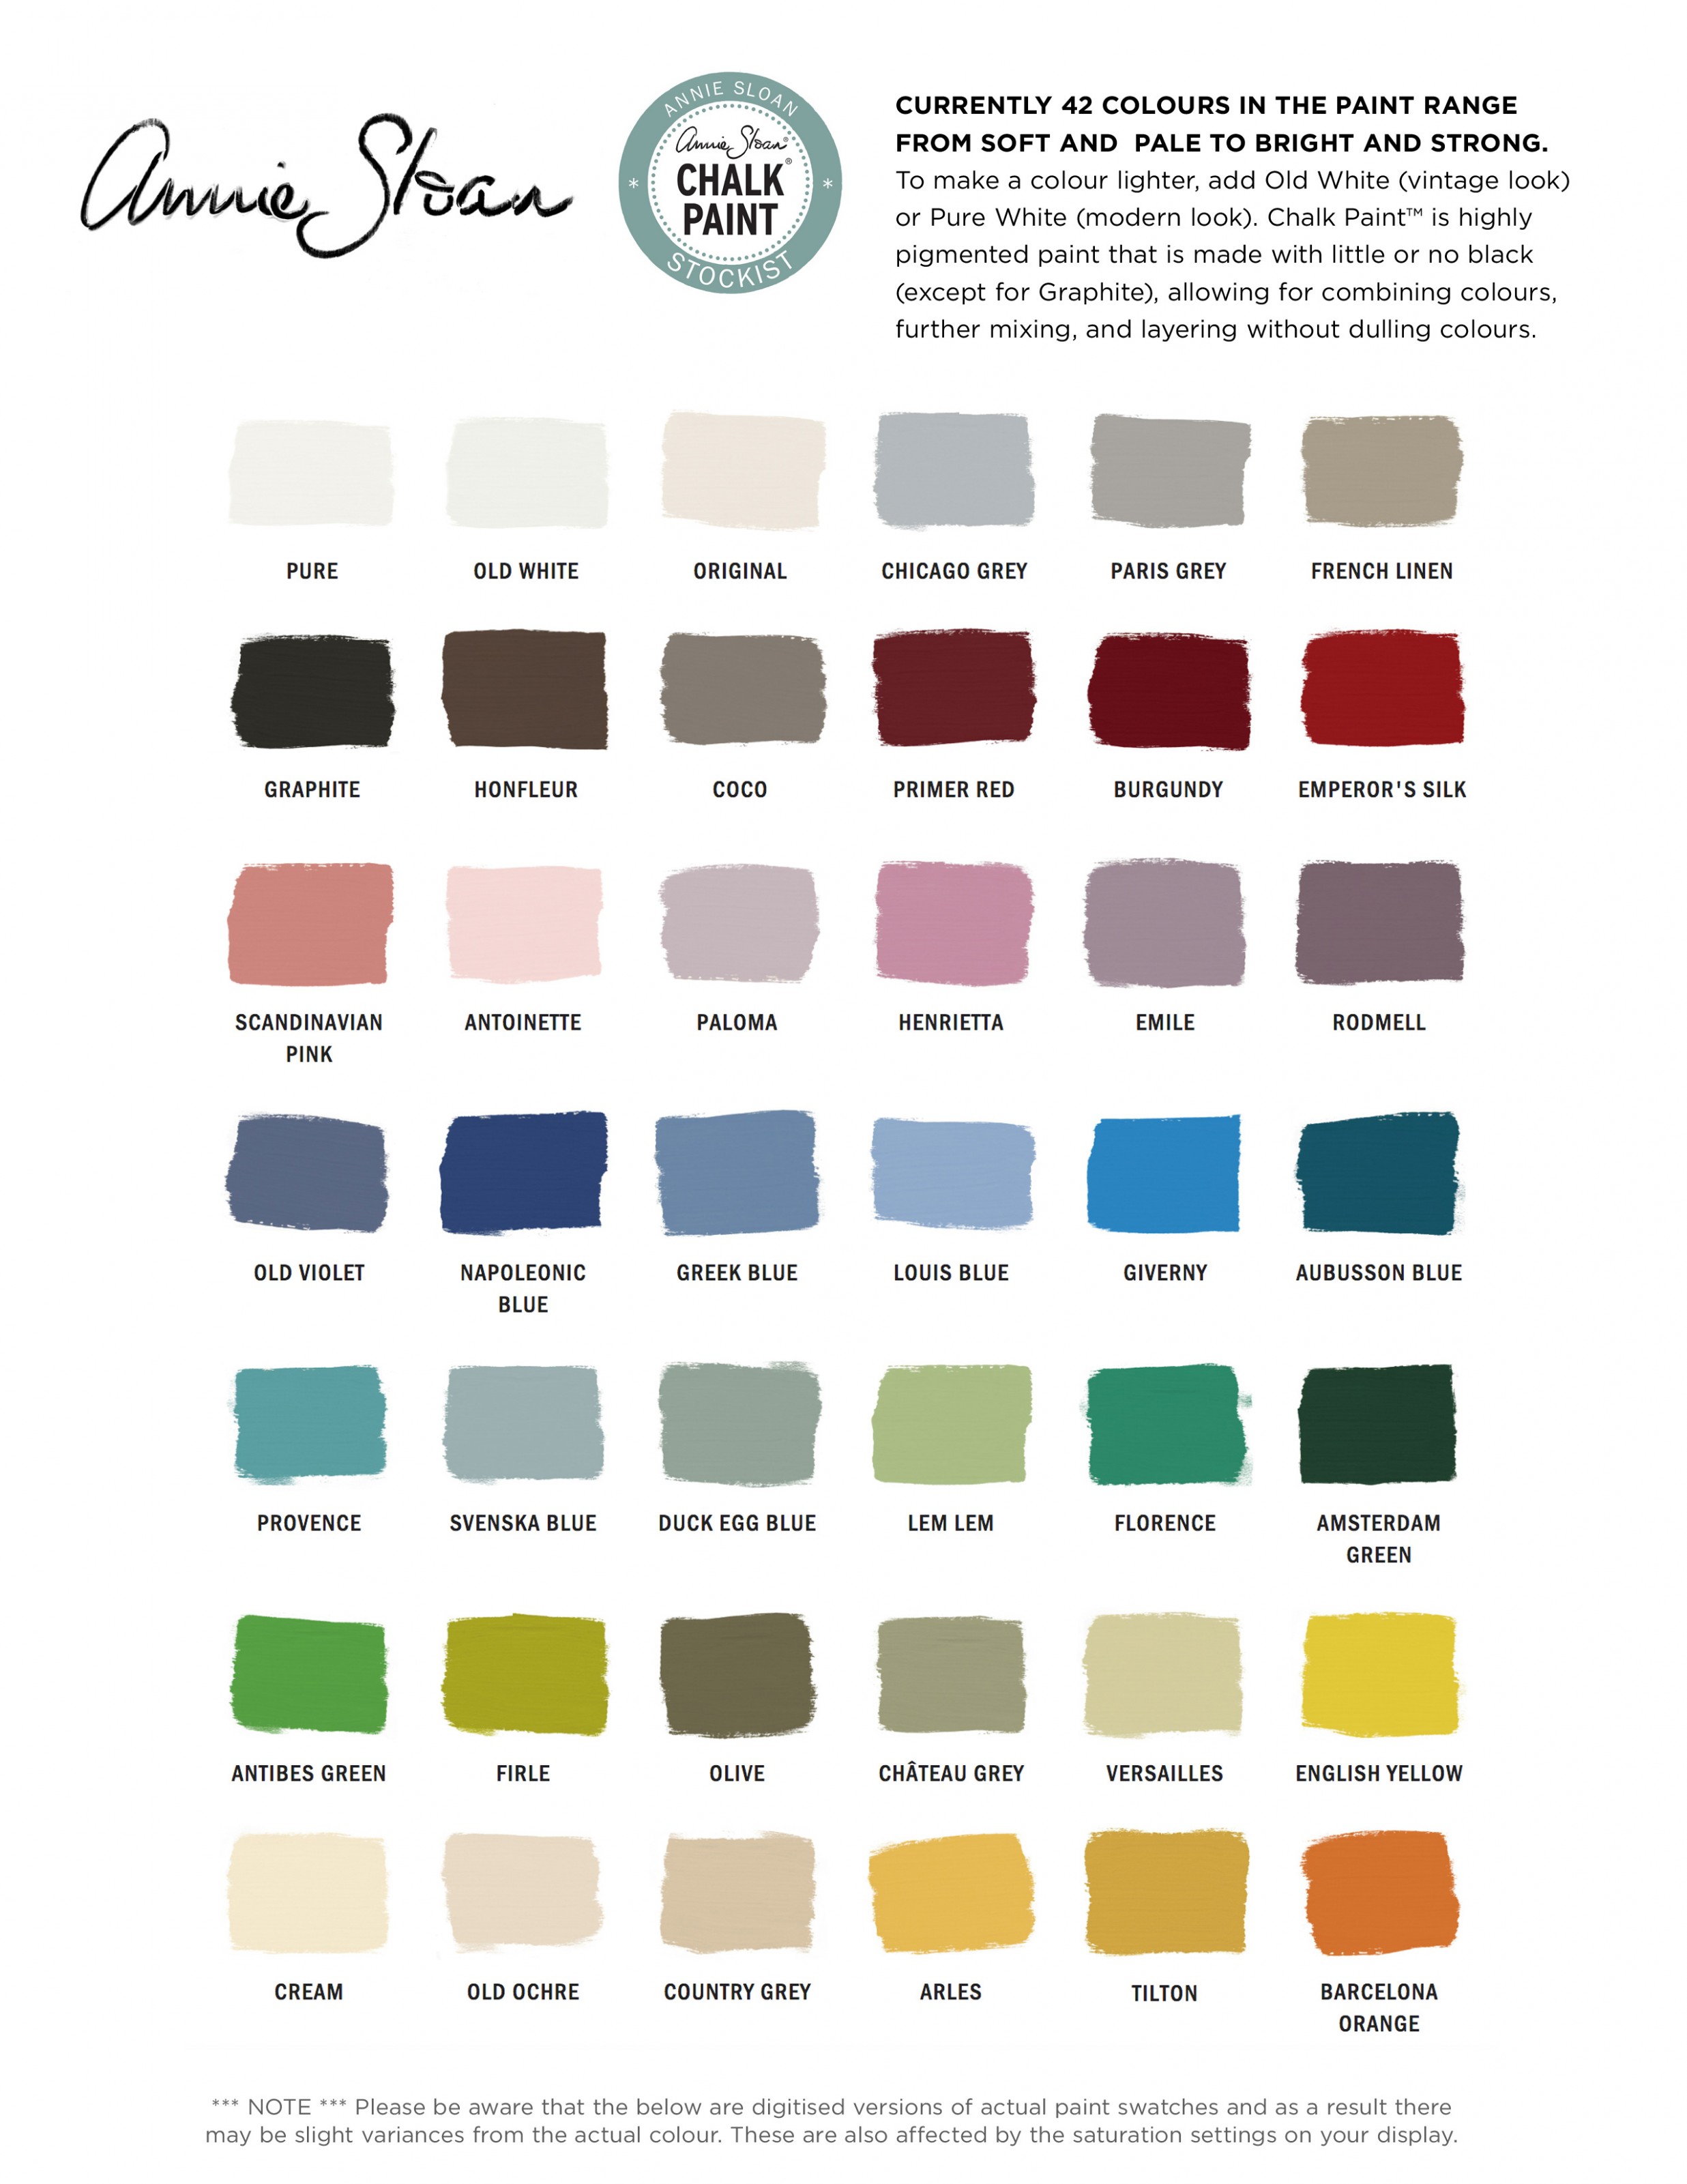 Chalk Paint® | Knot Too Shabby Furnishings Mixing Annie Sloan Chalk Paint Colors